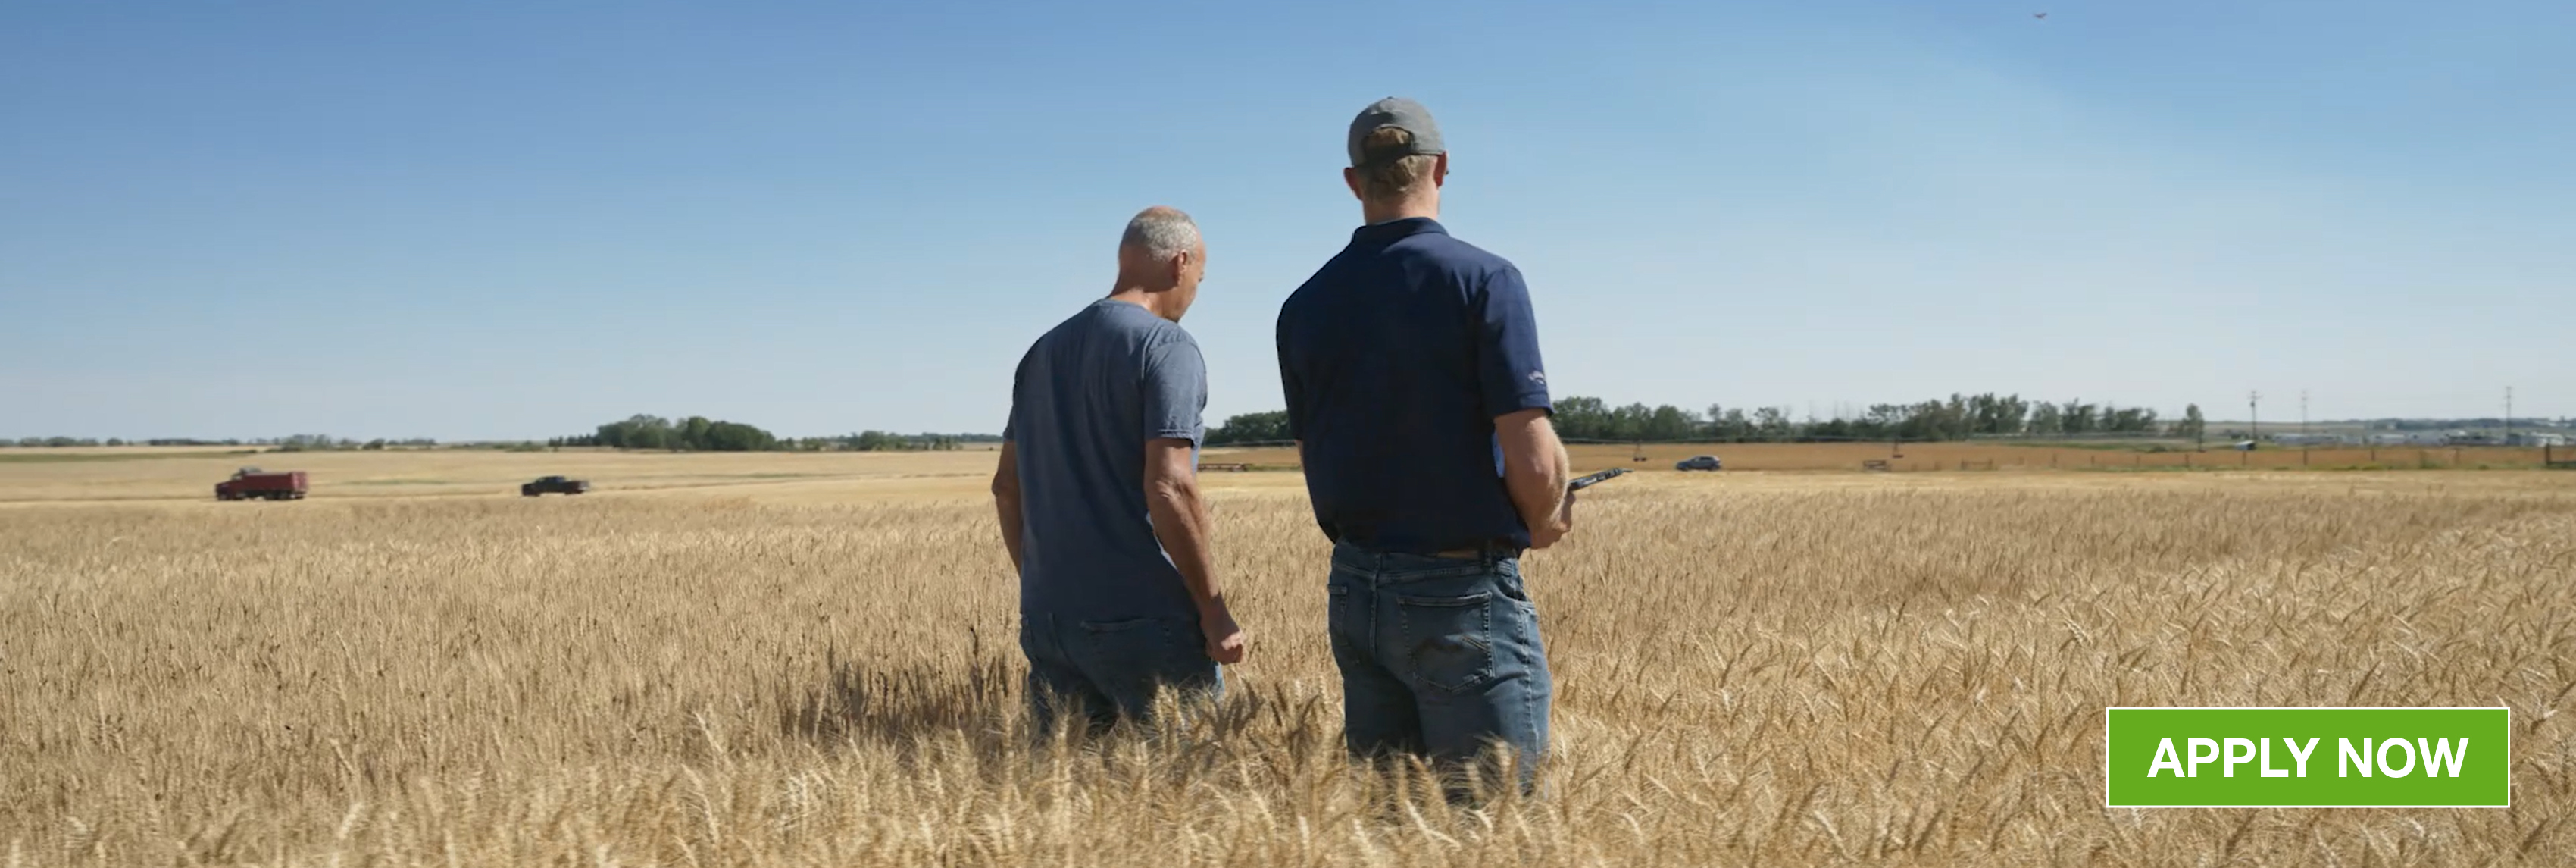 two people standing in a field